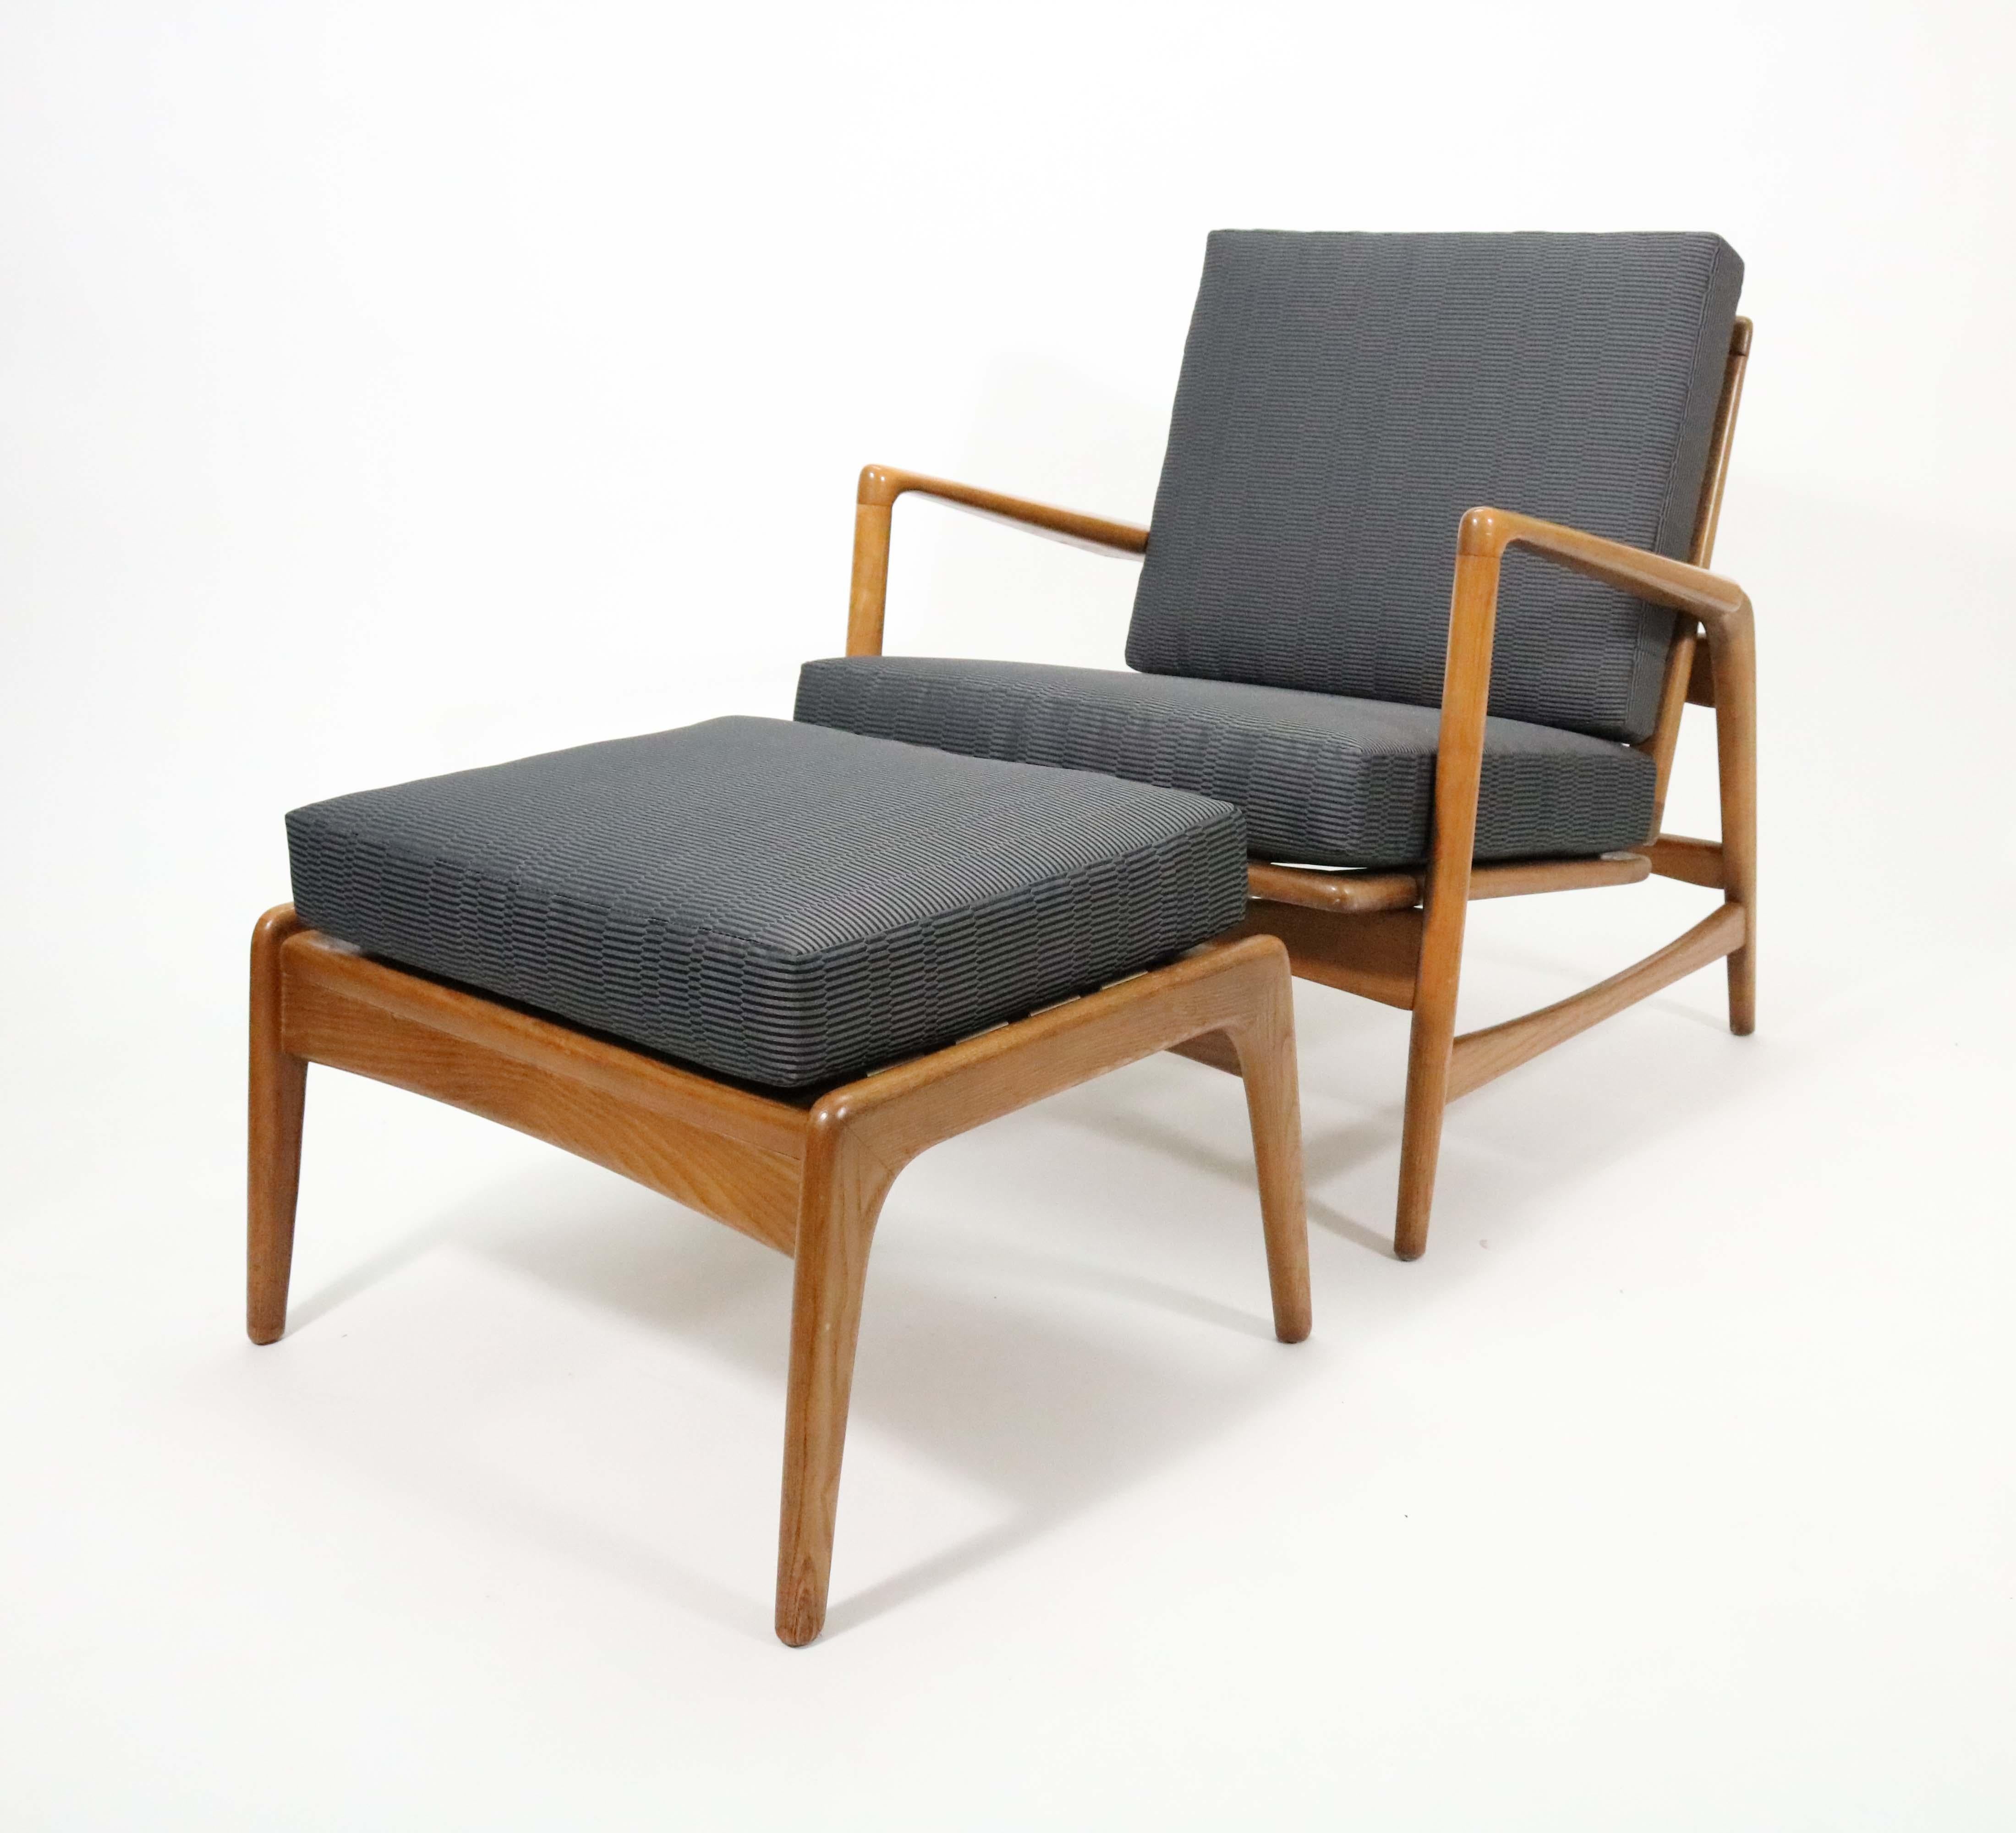 Walnut Lounge Chair and Ottoman with Adjustable Recline by Ib Kofod-Larsen 1